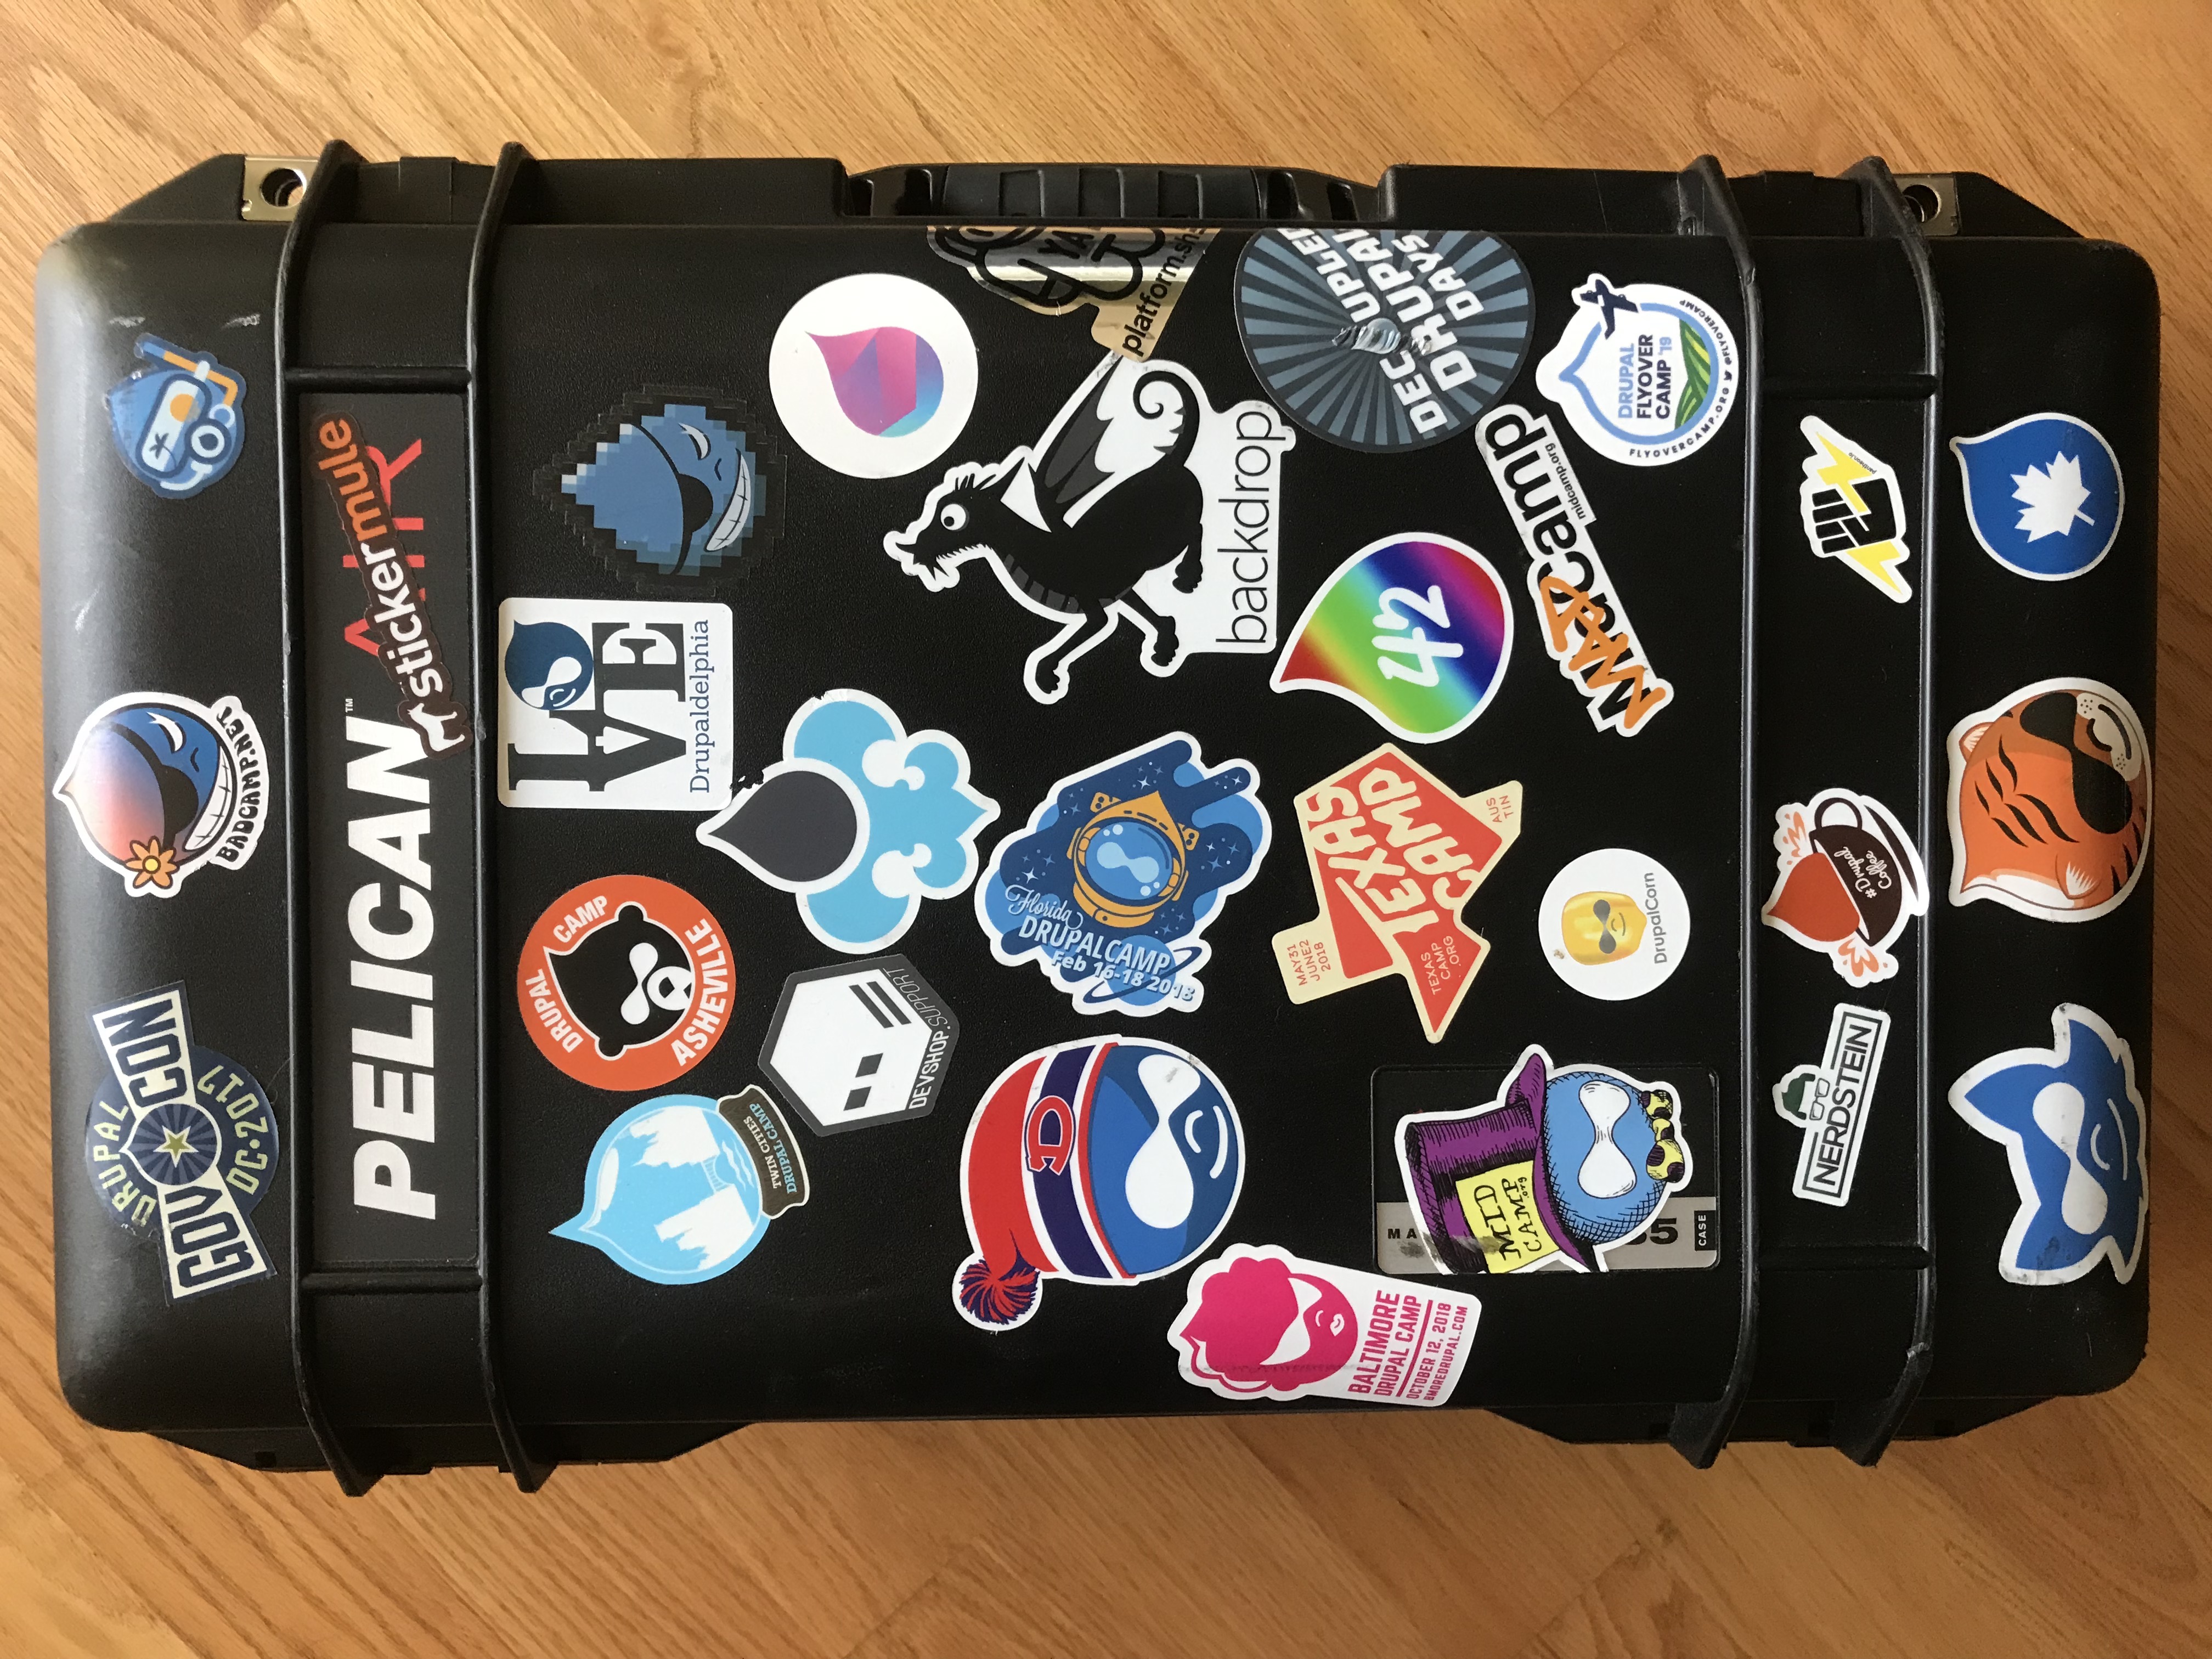 Pelican case covered in Drupal camp stickers